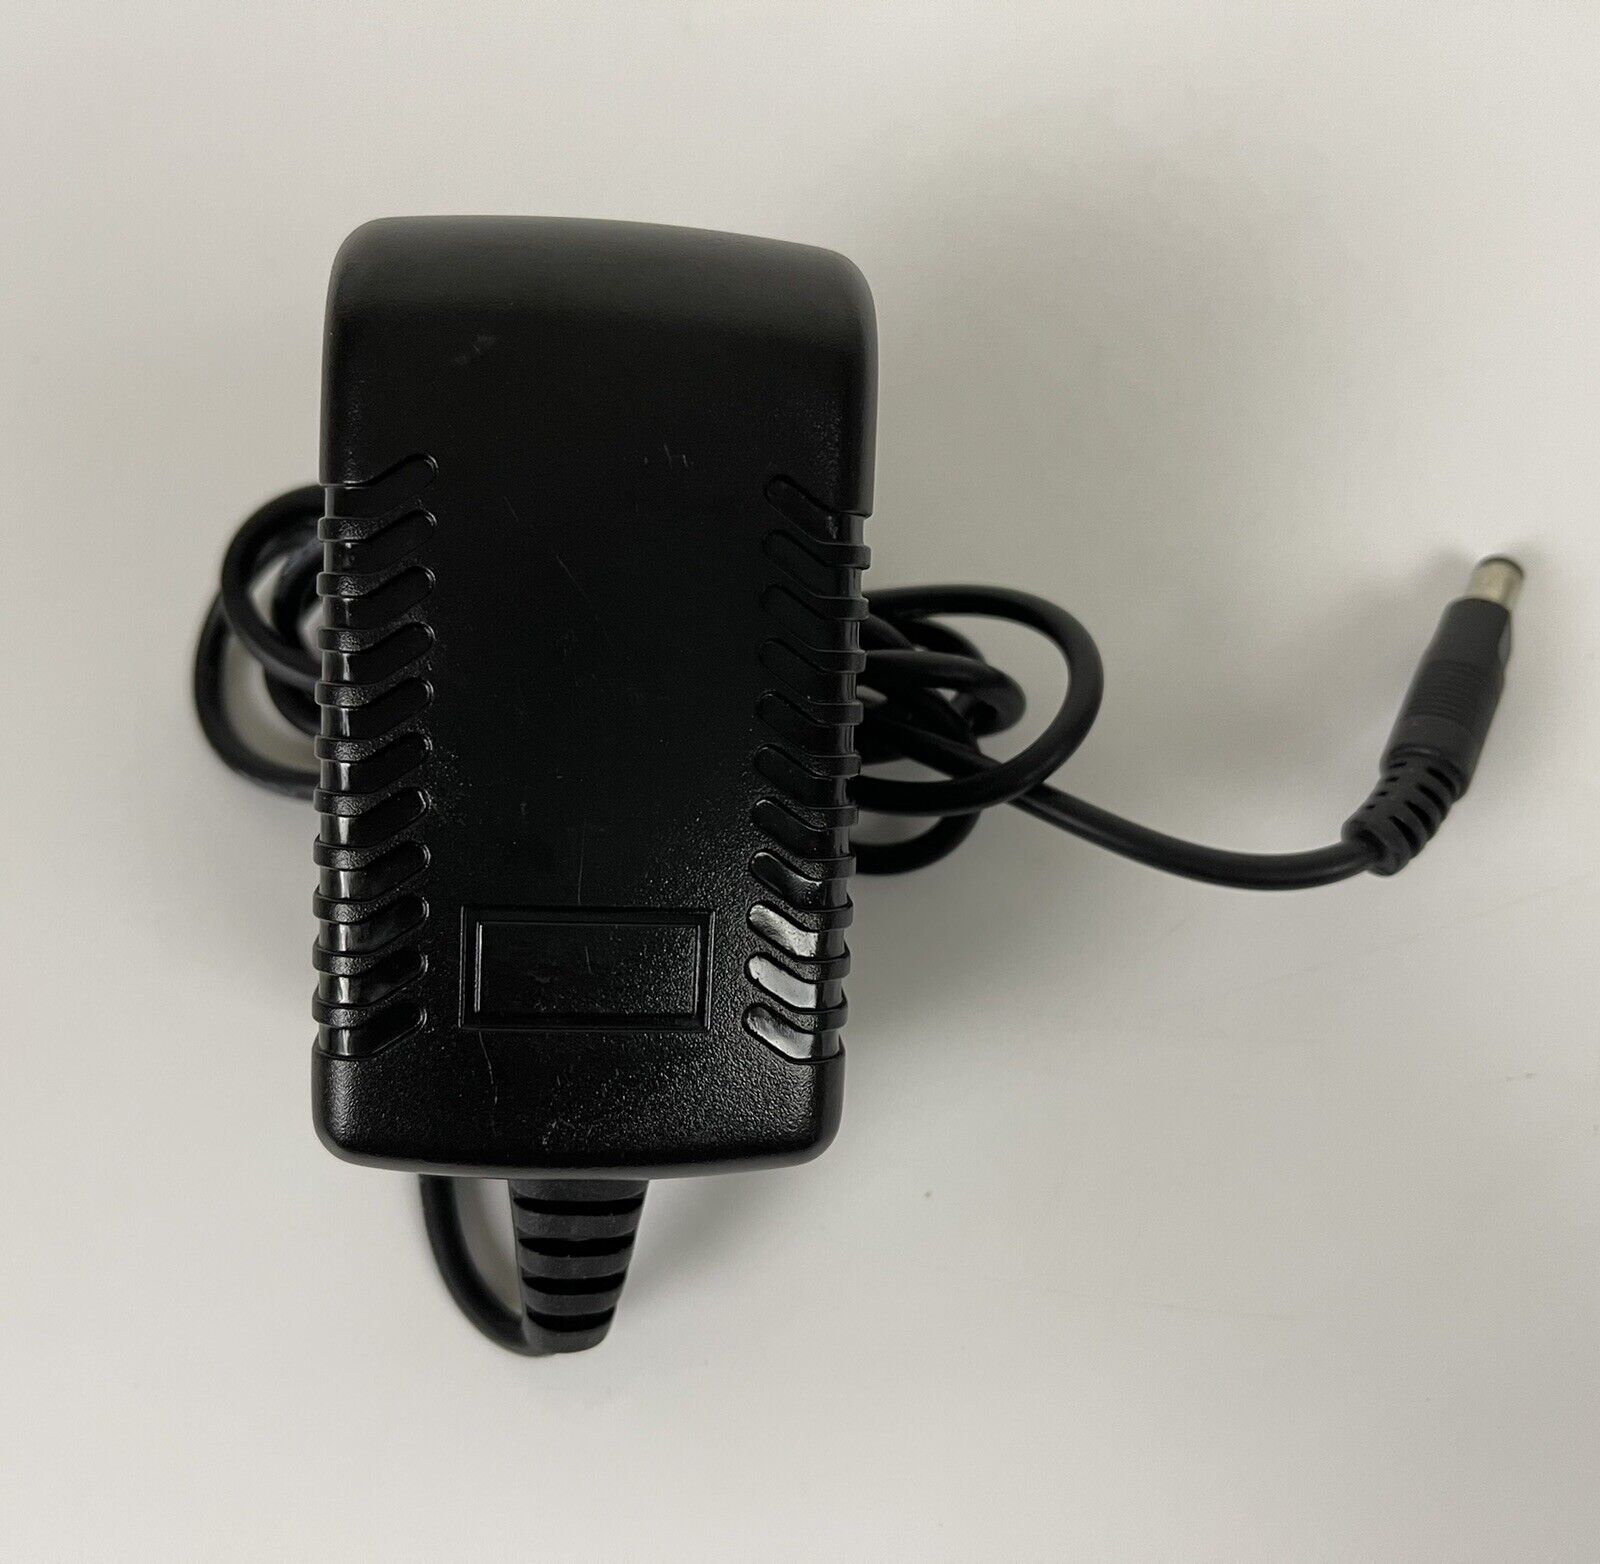 US Adapter Charger for Zmodo HS36-1202000US Switching Power Cord Type: Power Cord Features: Powered Brand: Unbrande